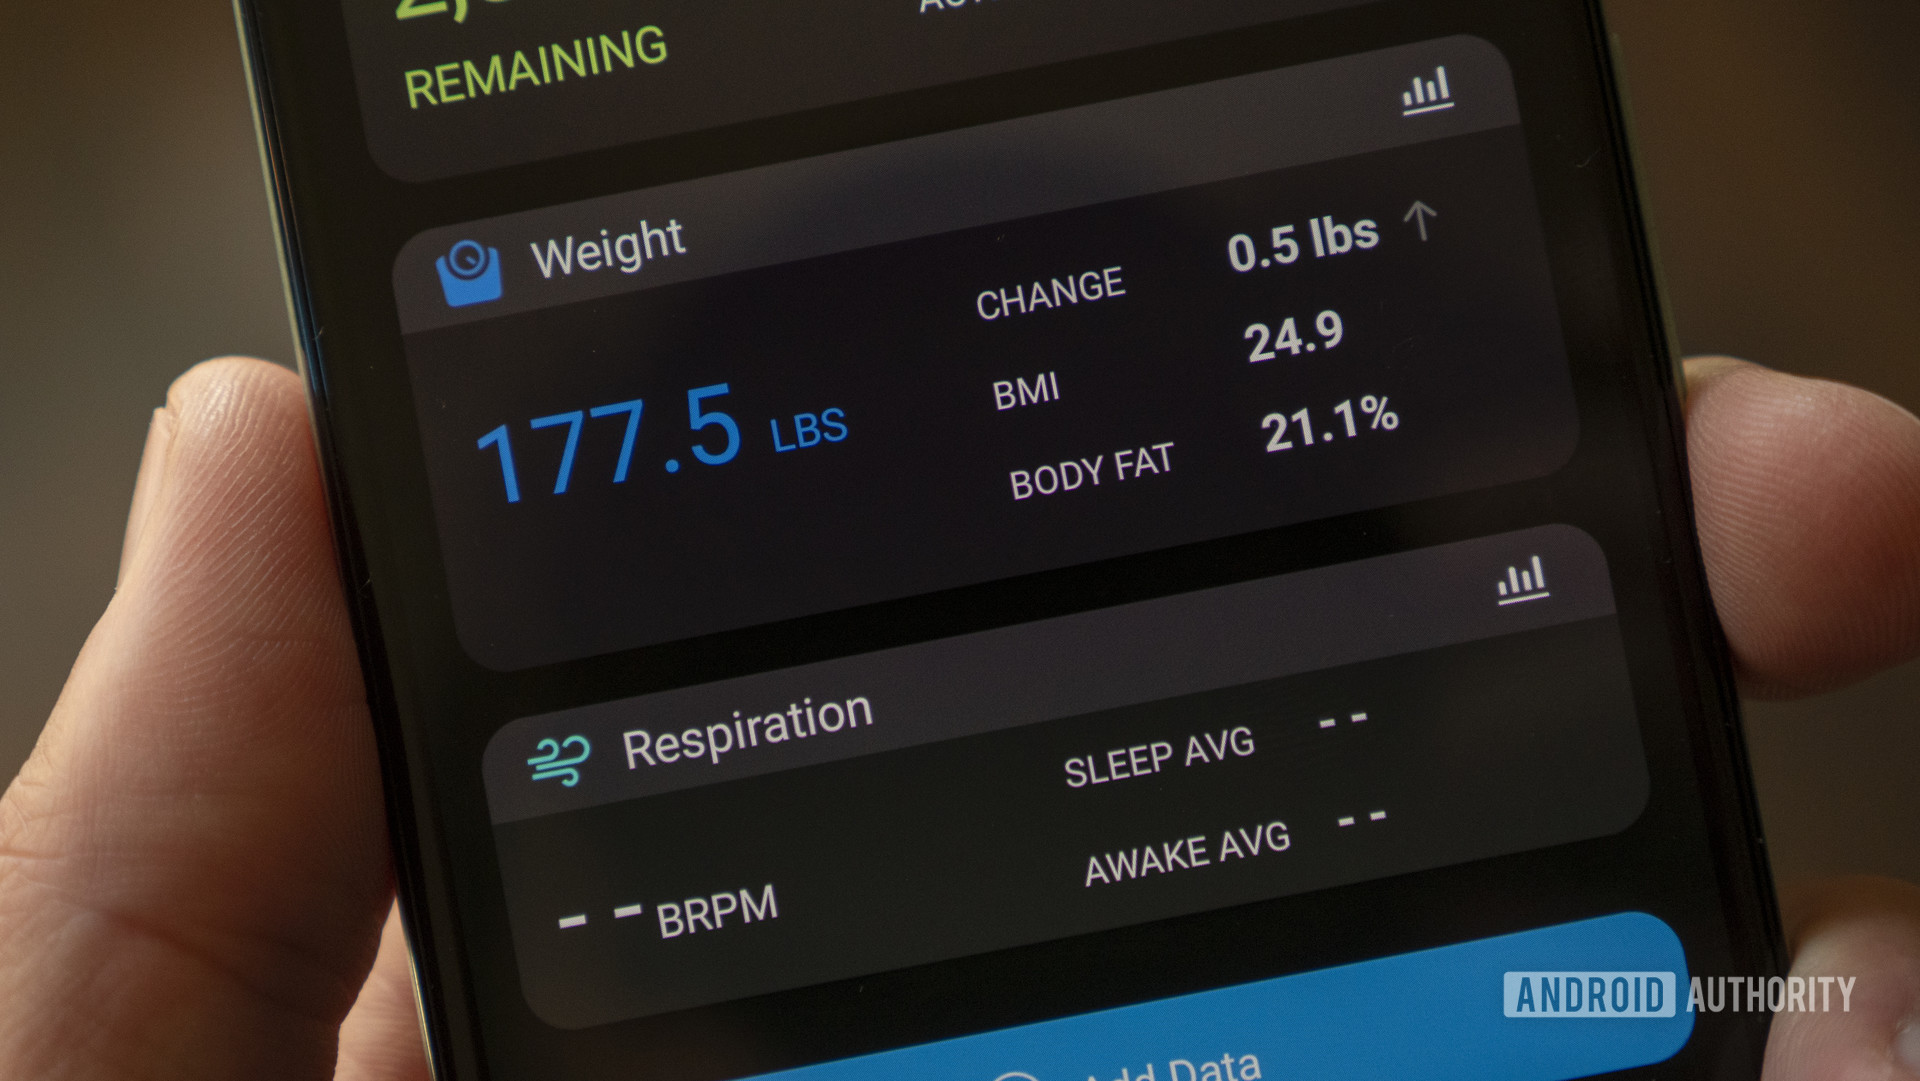 https://www.androidauthority.com/wp-content/uploads/2020/11/garmin-index-s2-smart-scale-review-garmin-connect-weight-widget-home-screen.jpg